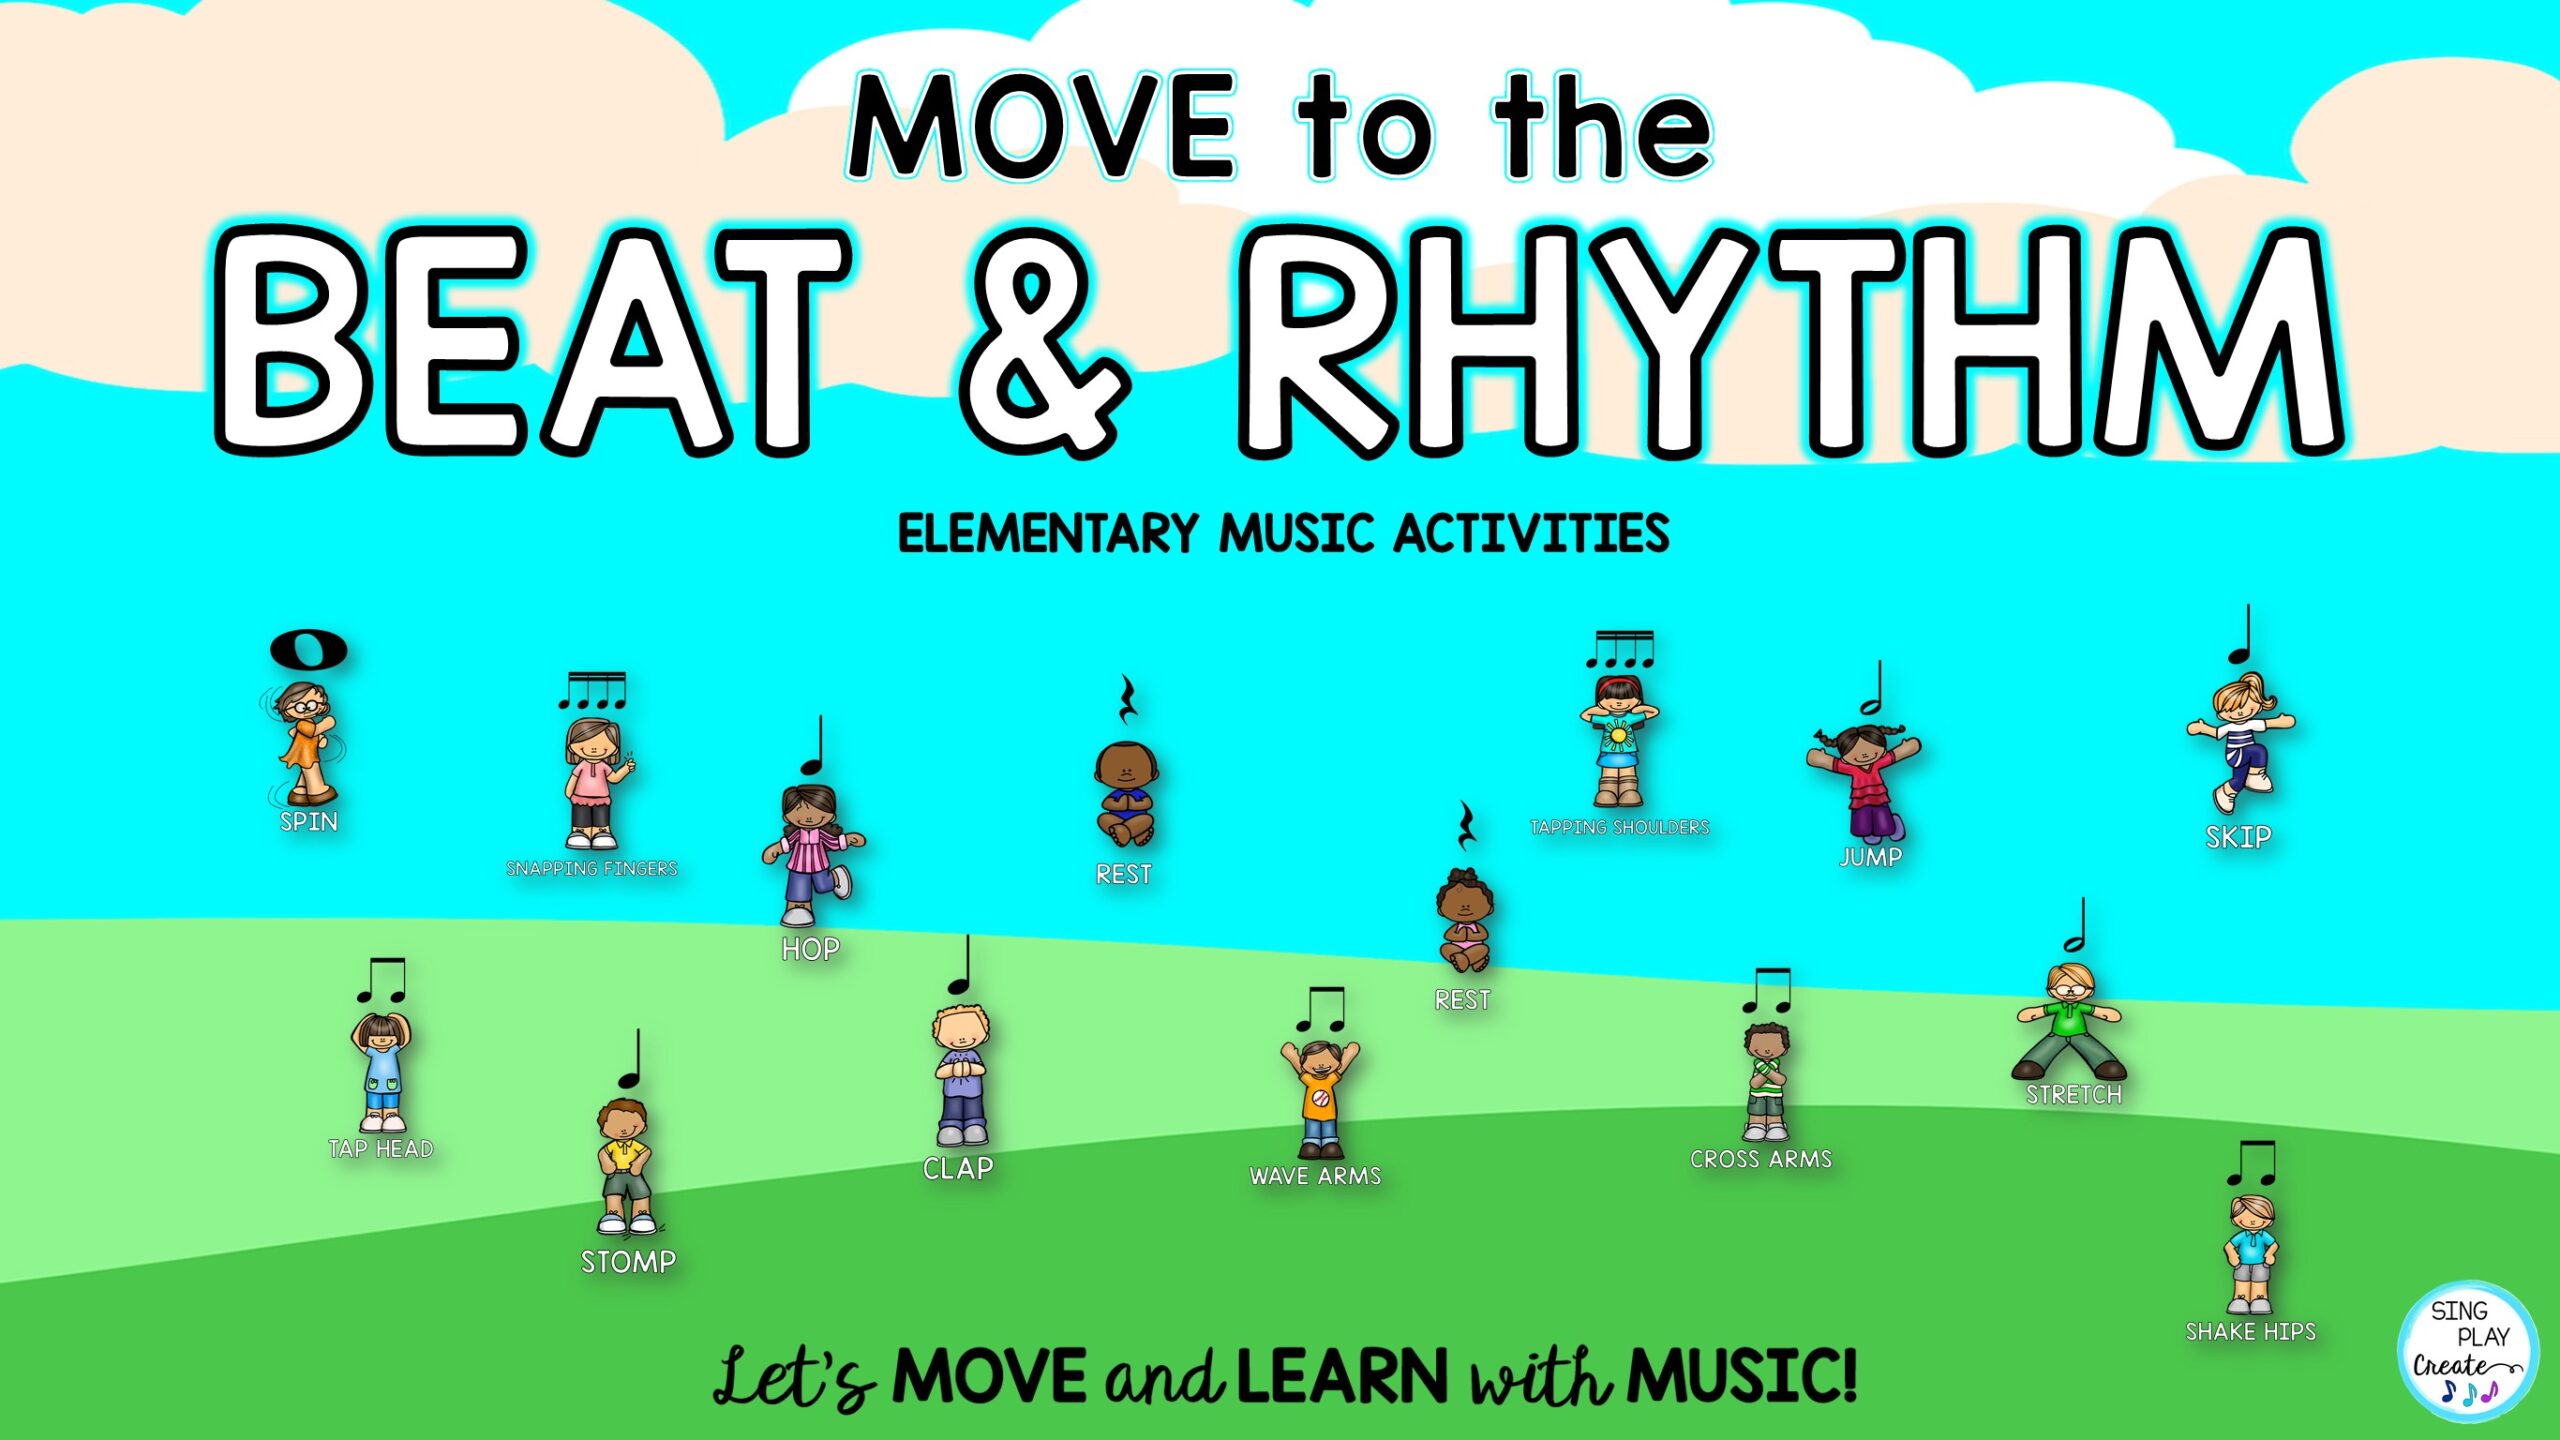 You are currently viewing Elementary Music Beat and Rhythm Movement Activities